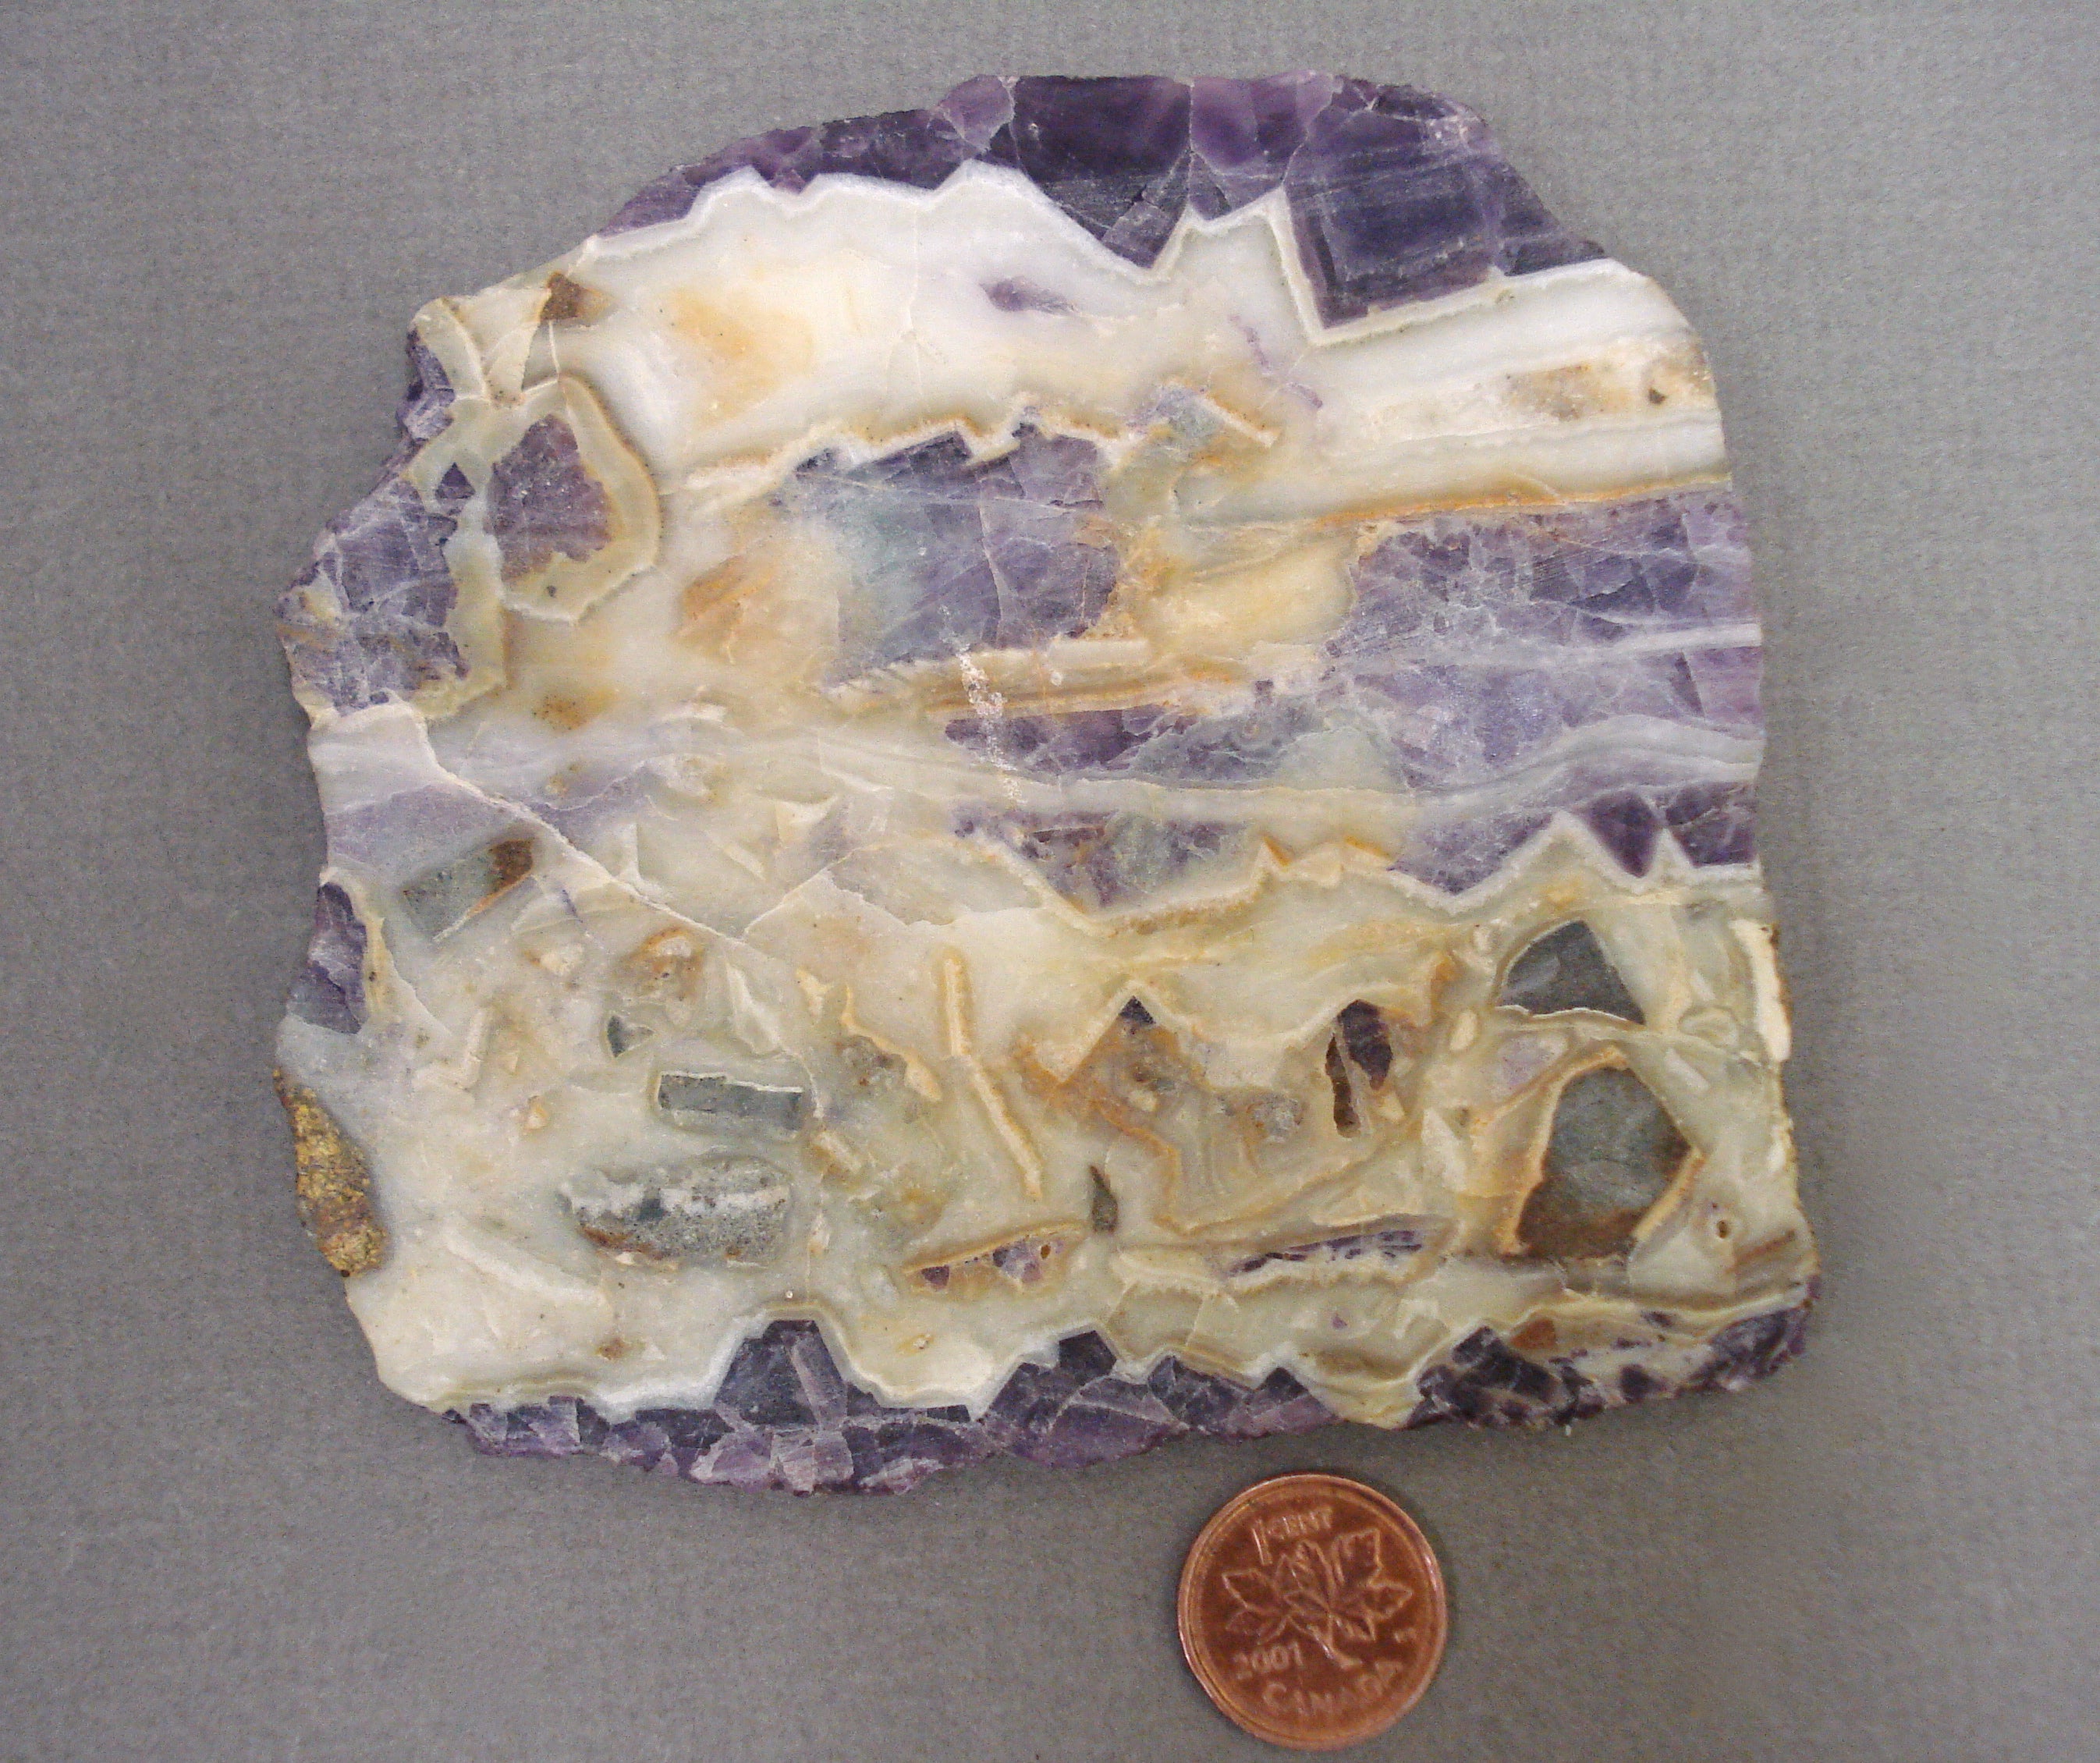 Quartz and Fluorite Slab next to a penny for size comparison